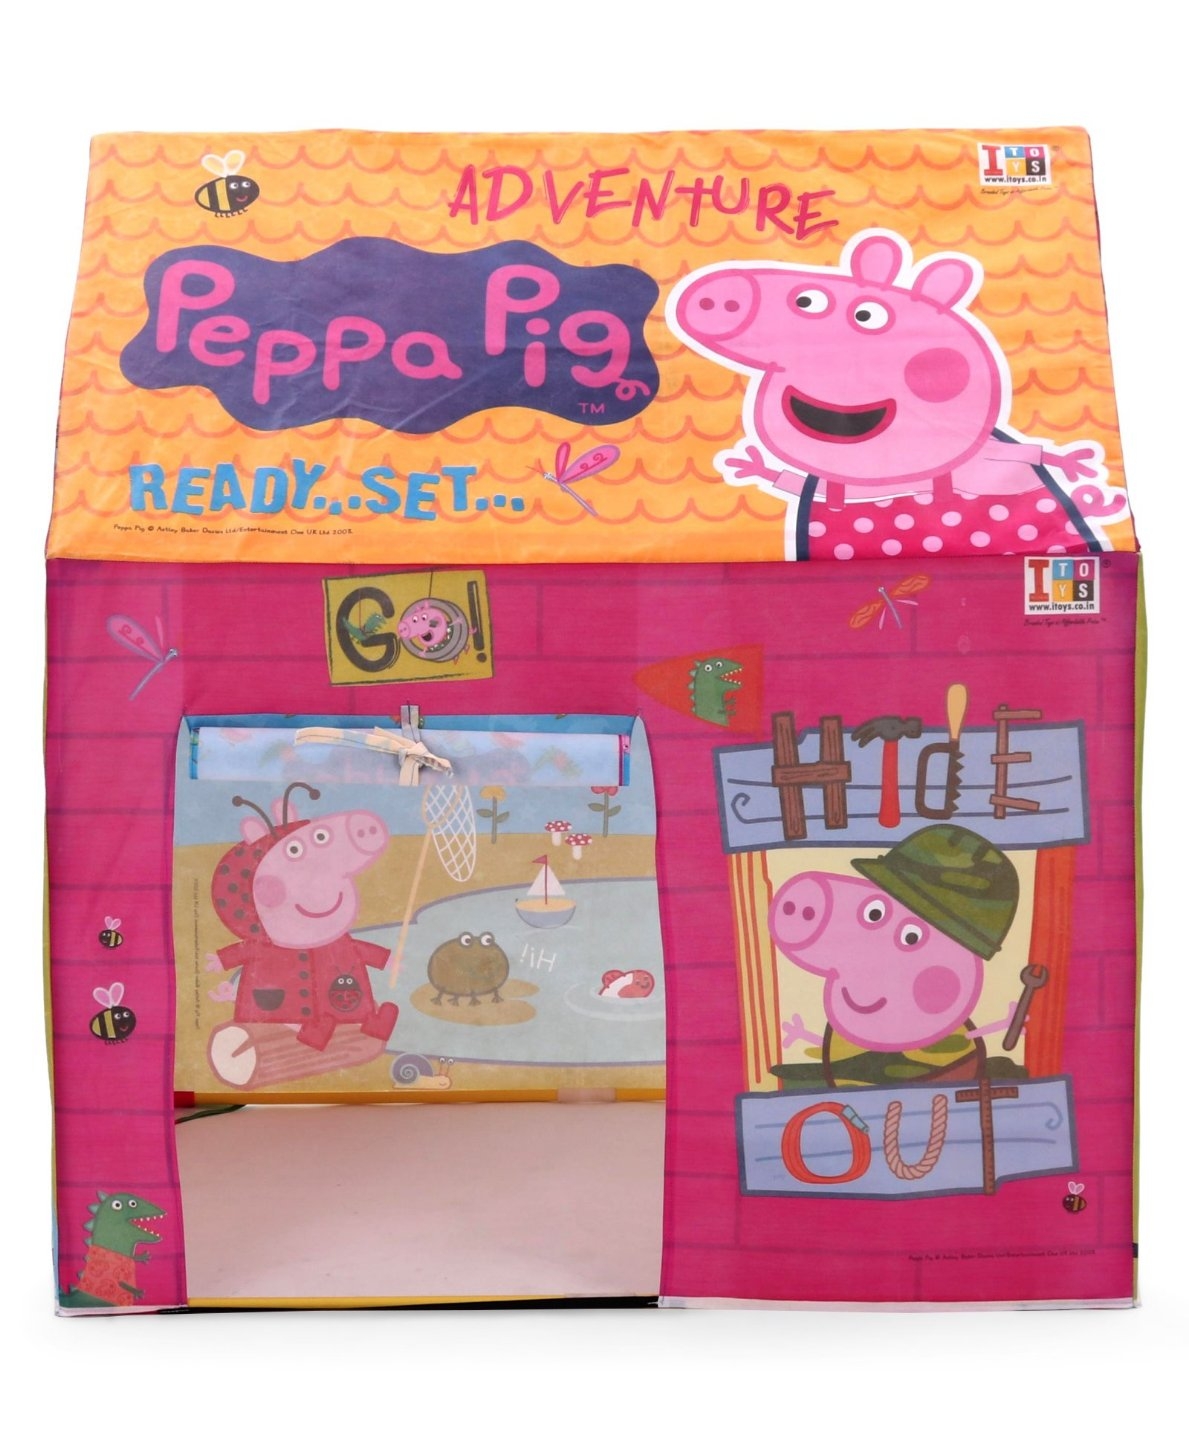 Peppa Pig Play House Tent